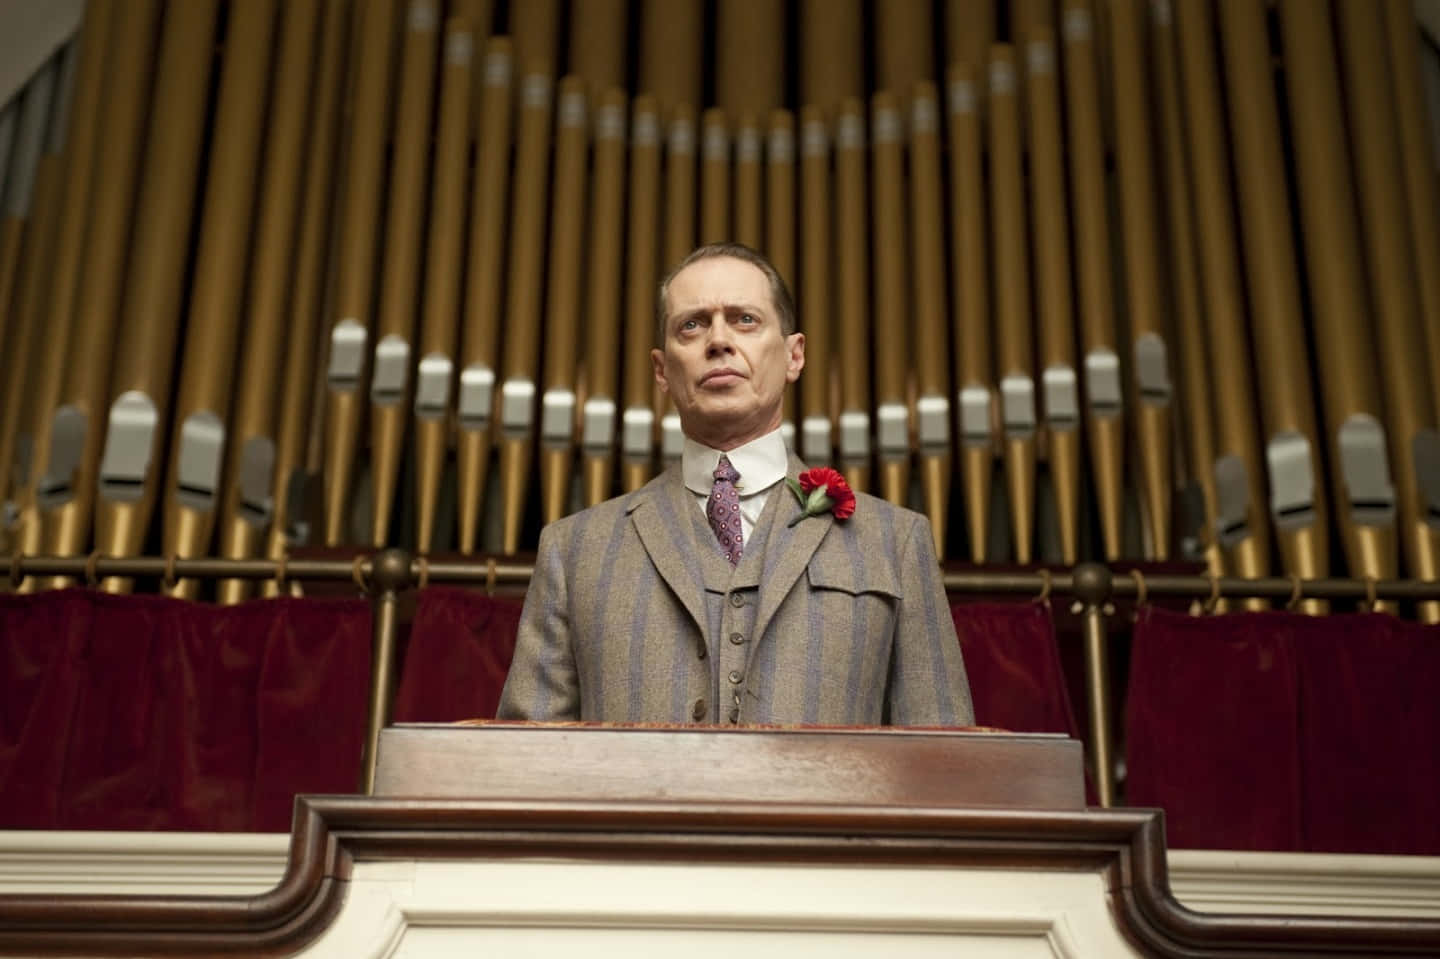 Steve Buscemi In Character, Portraying The Role Of Such An Amazing Actor Background